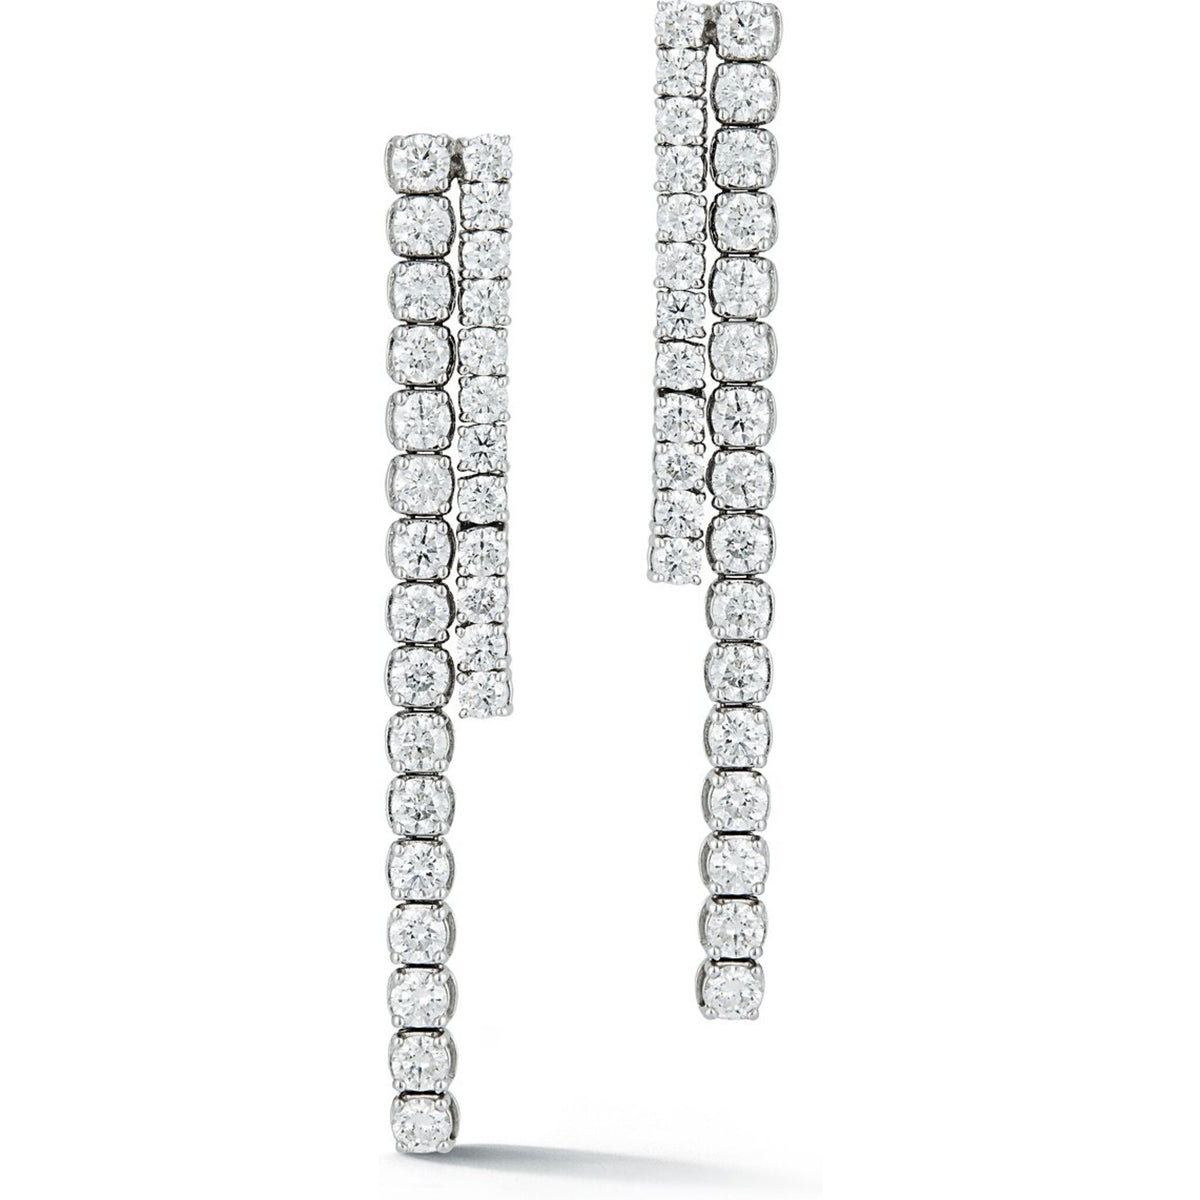 Sofer Jewelry - Two Line Pave and Bezel Diamond Drop Earrings in 14K White Gold